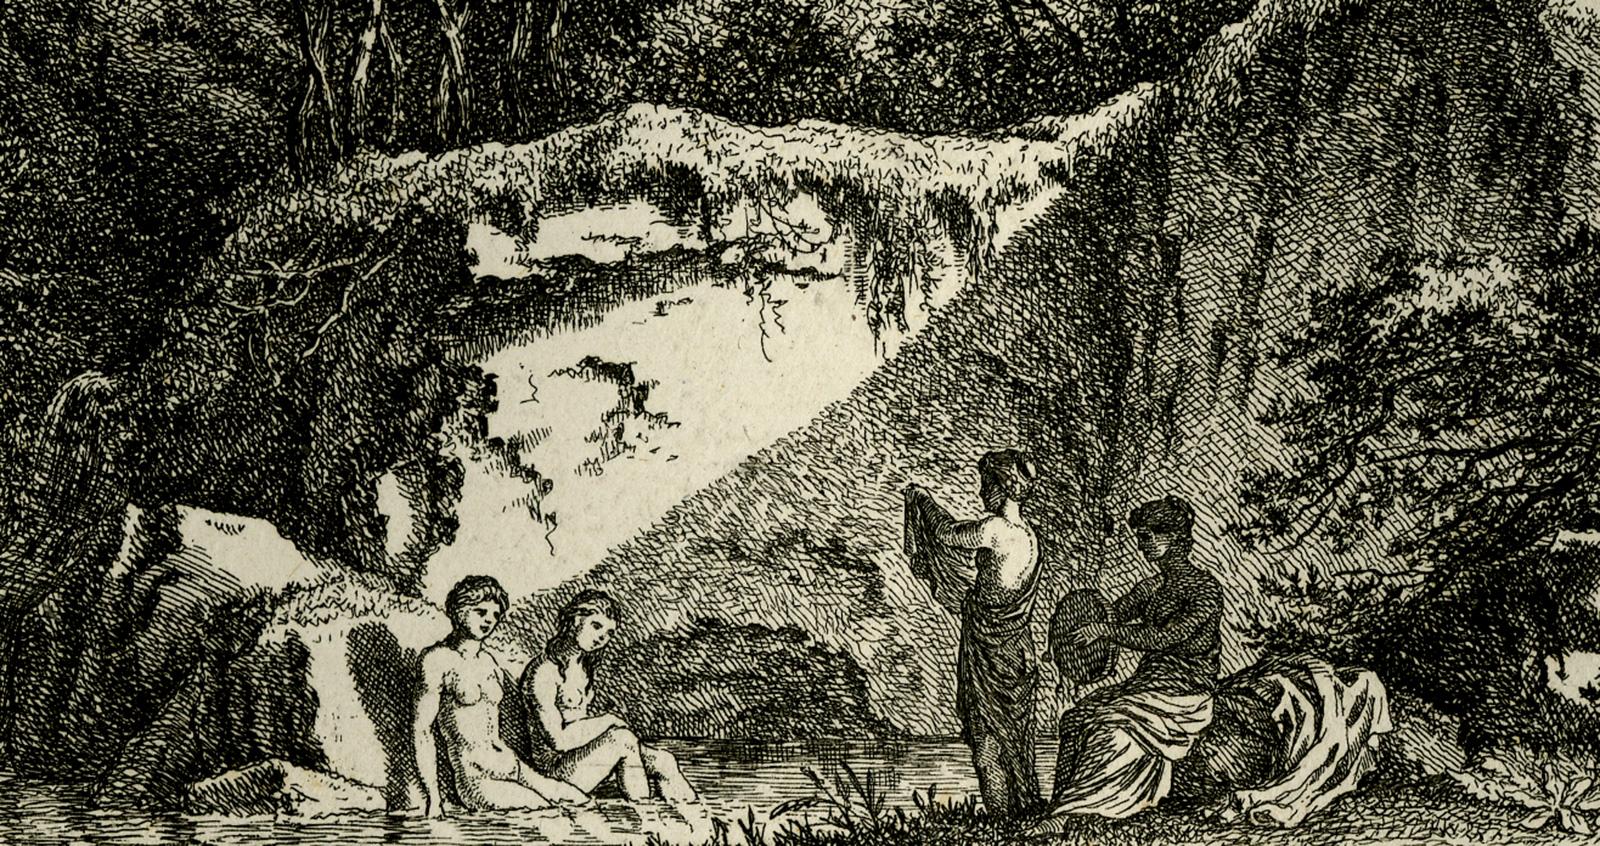 Arcadian landscape - People bathing by Salomon Gessner - Etching - 18th Century For Sale 1